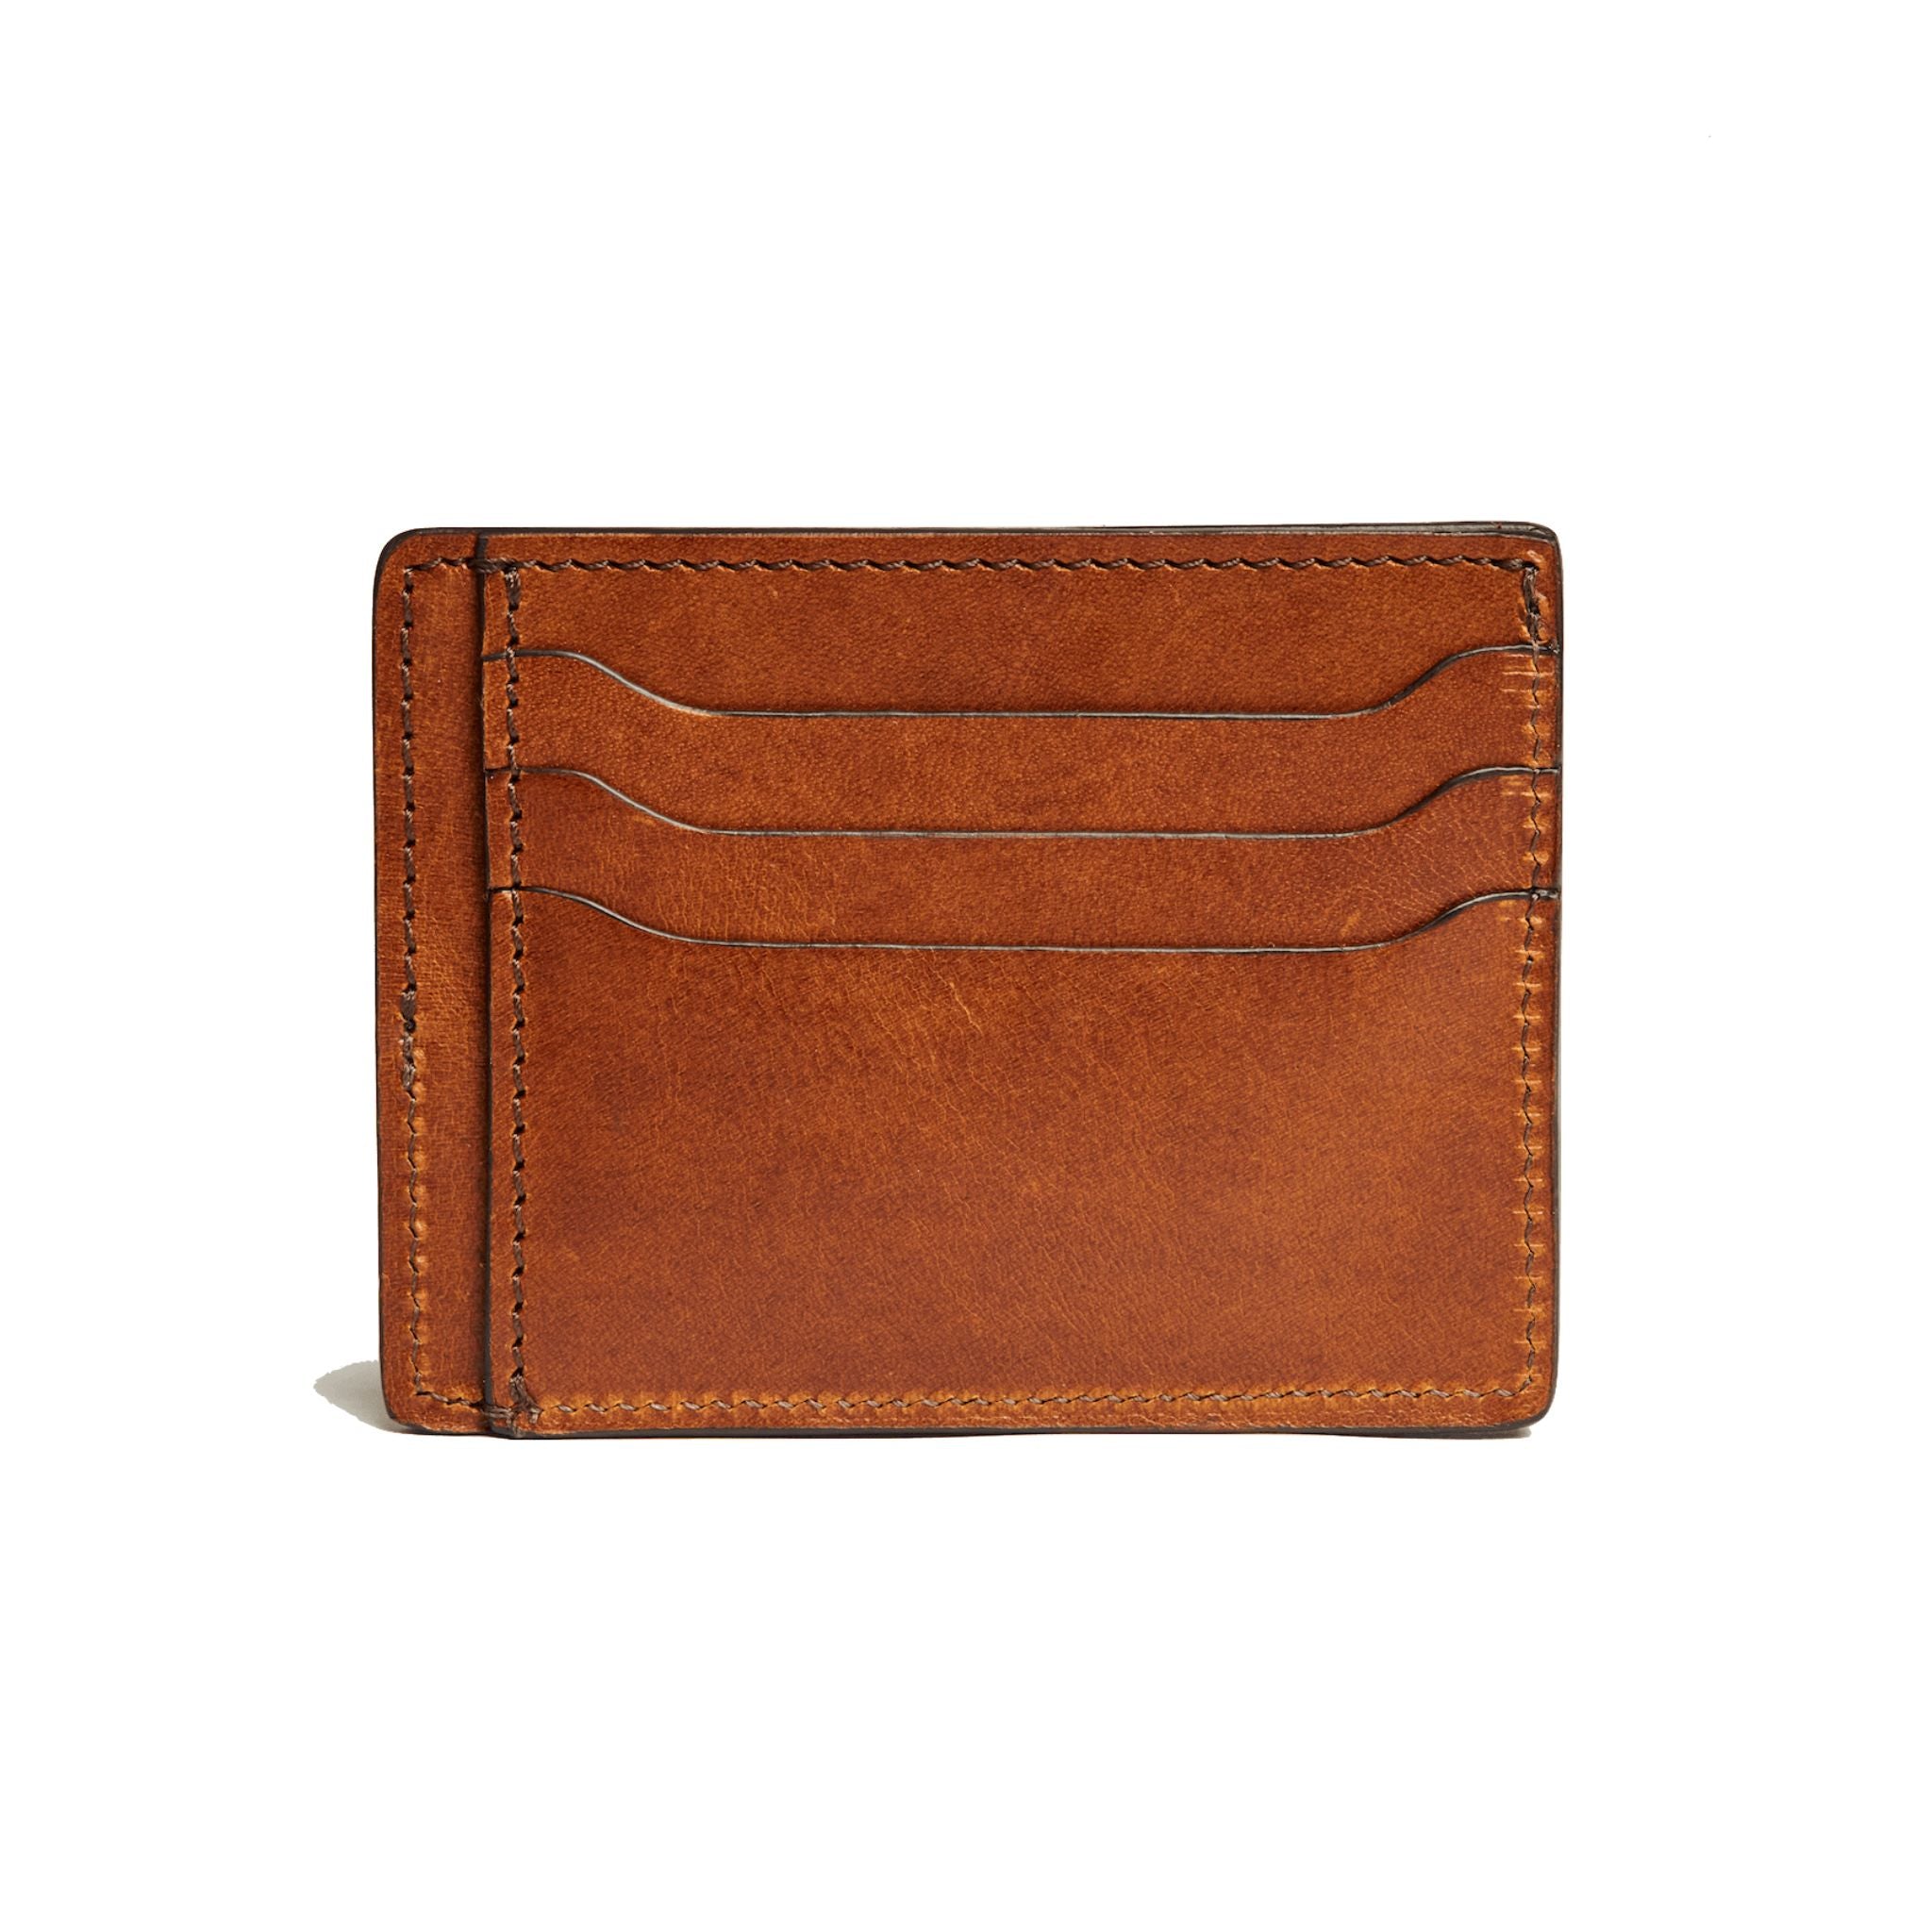 Four Card Carrier Slim Wallet in Boardroom Taupe Togo Leather